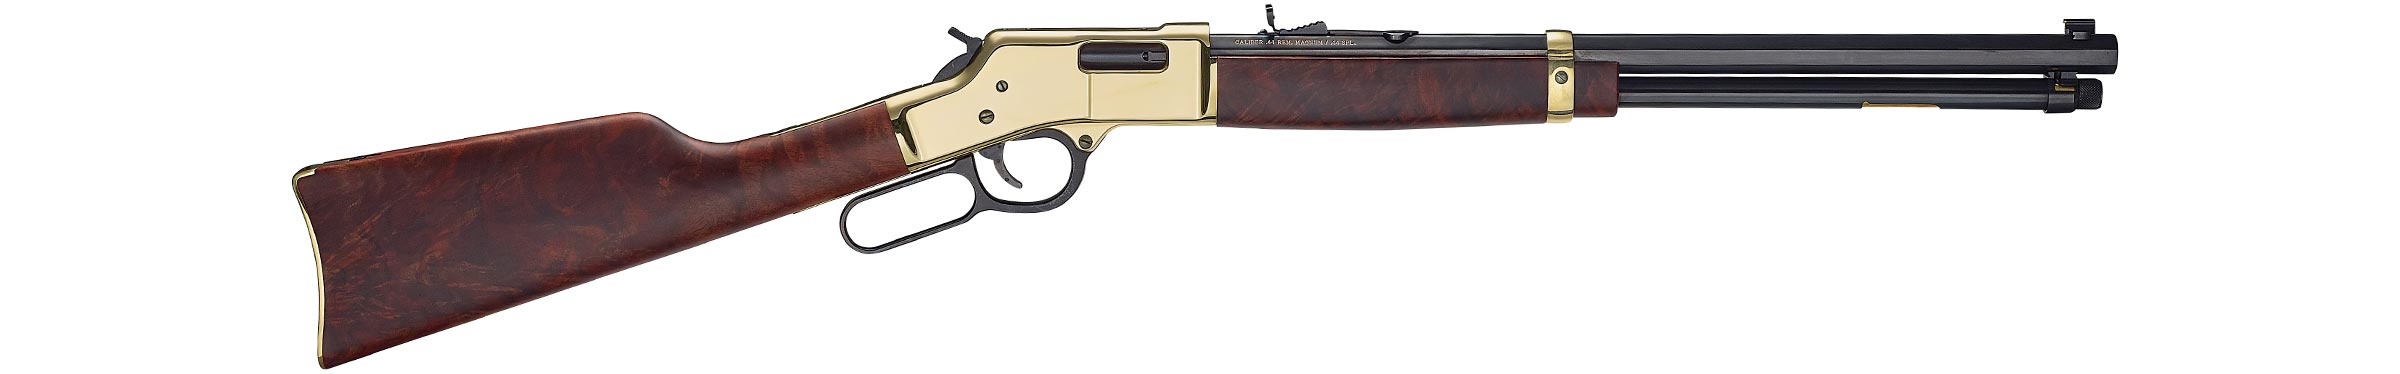 Henry Big Boy Classic .44 Mag/.44 Spl Masterpiece Collection